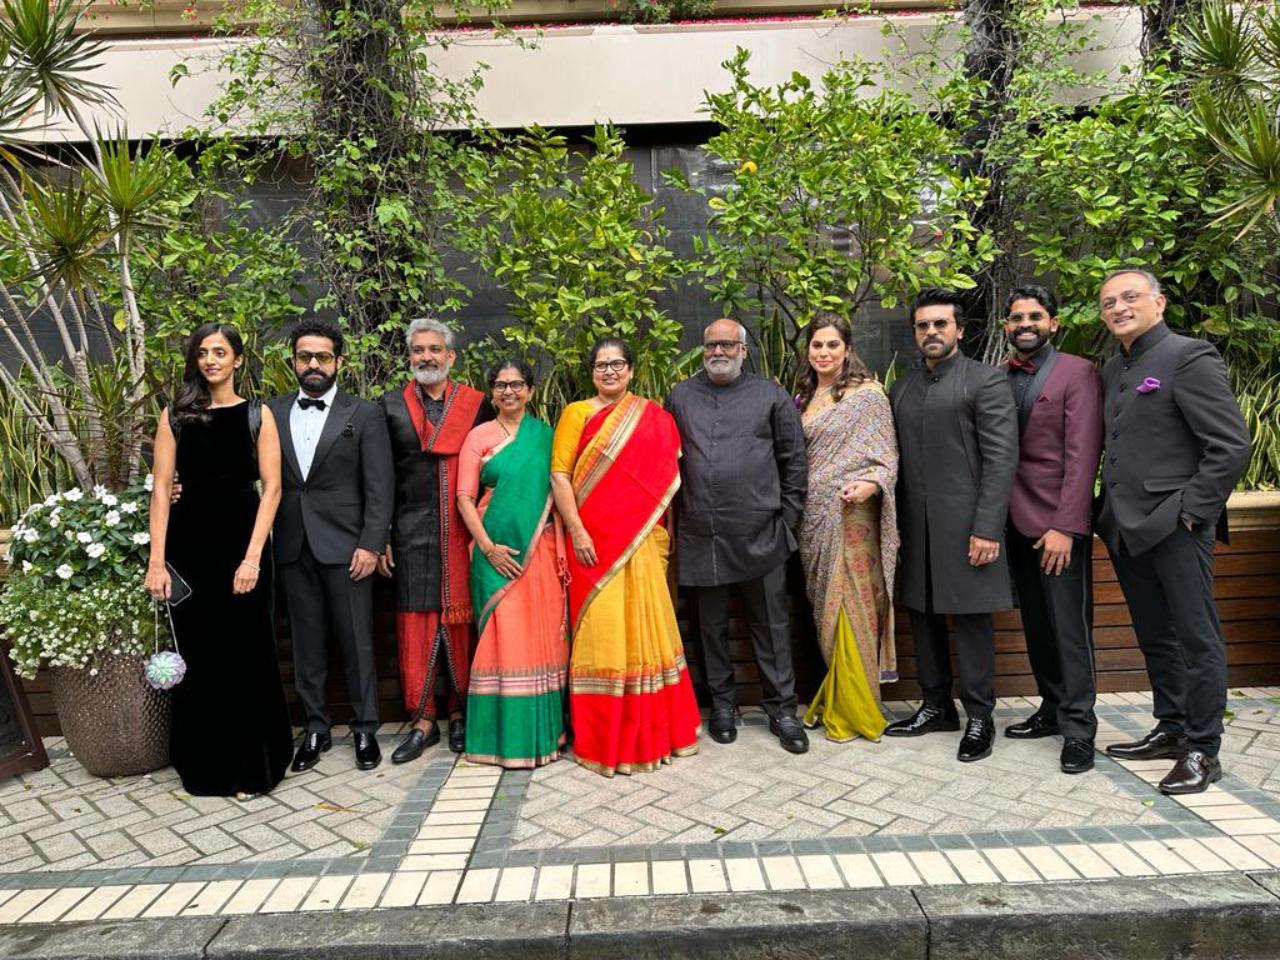 The team of RRR arrived for the Golden Globe Awards 2023 with their respective family members. All looked dapper in their outfits and made for a picture perfect moment as they posed together on the red carpet. Rajamouli's wife Rama, MM Keeravani's wife Srivalli, and Ram Charan's wife Upasana opted for traditional sarees for the occasion